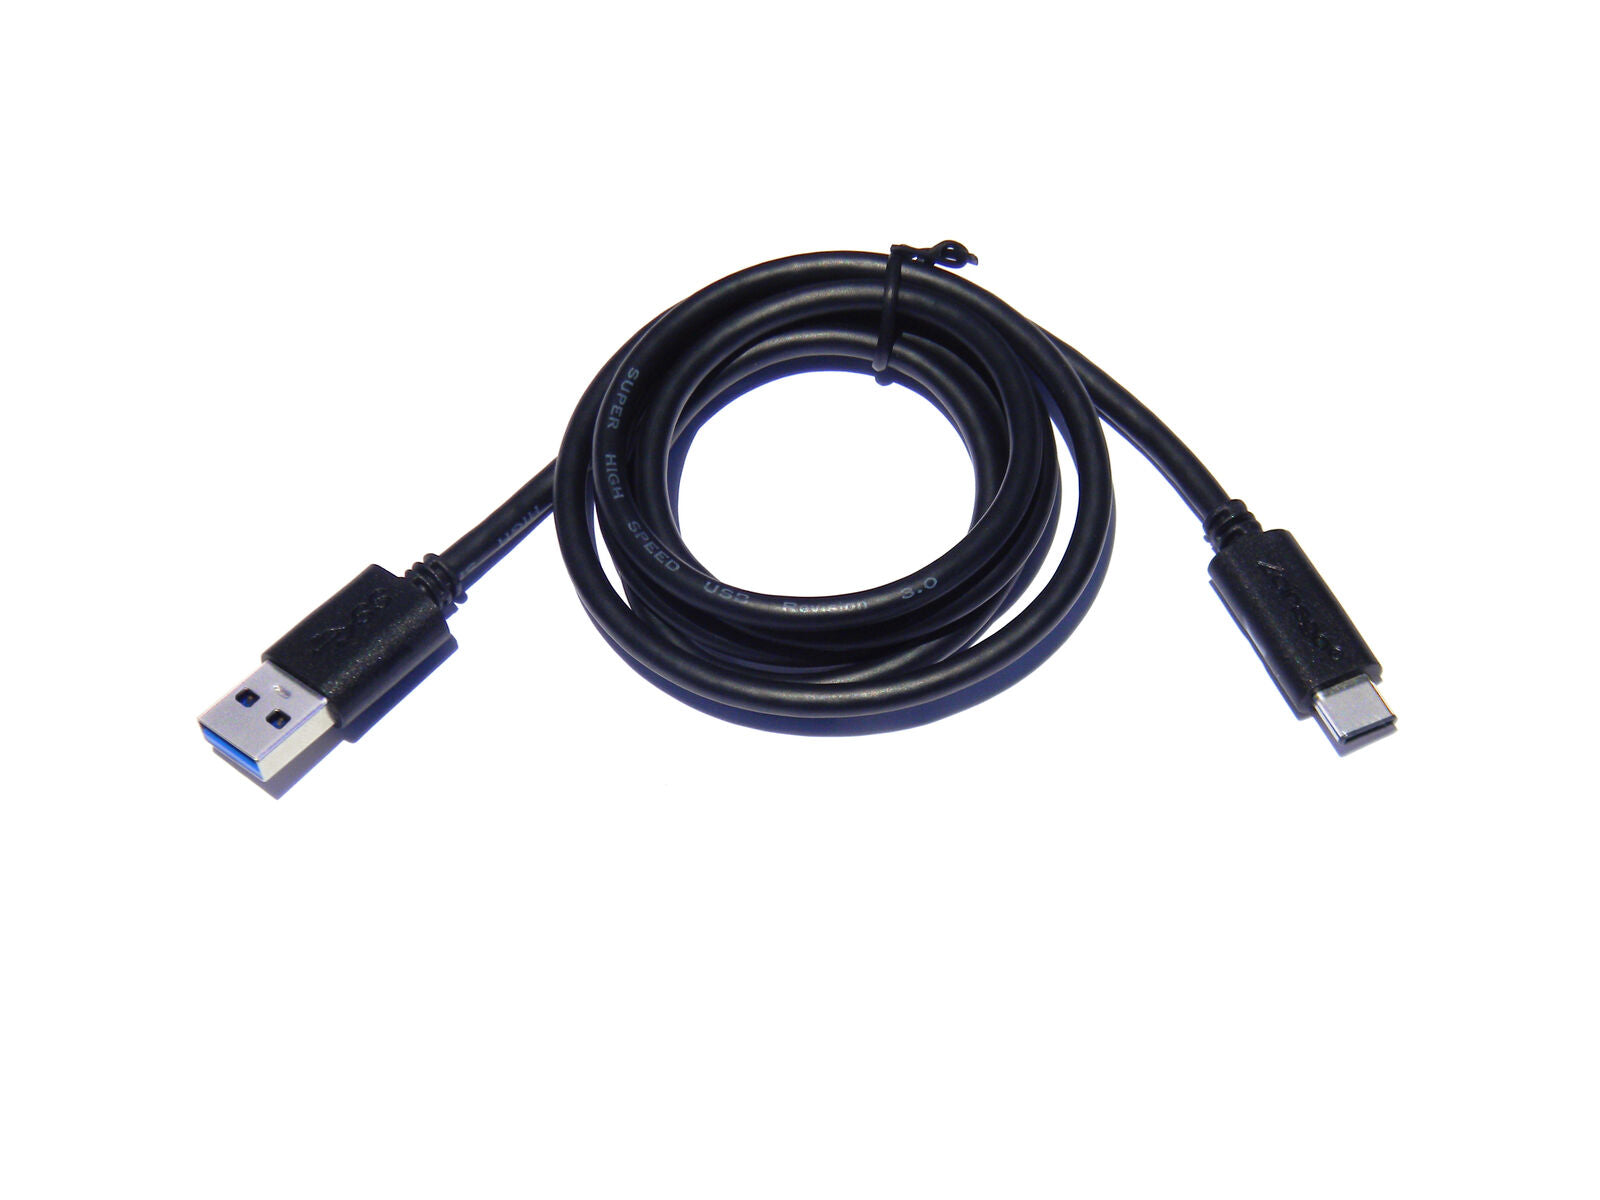 3ft USB to USB Sync / Charging Cable Charger Cord for Android Smartphone 5Gb/s